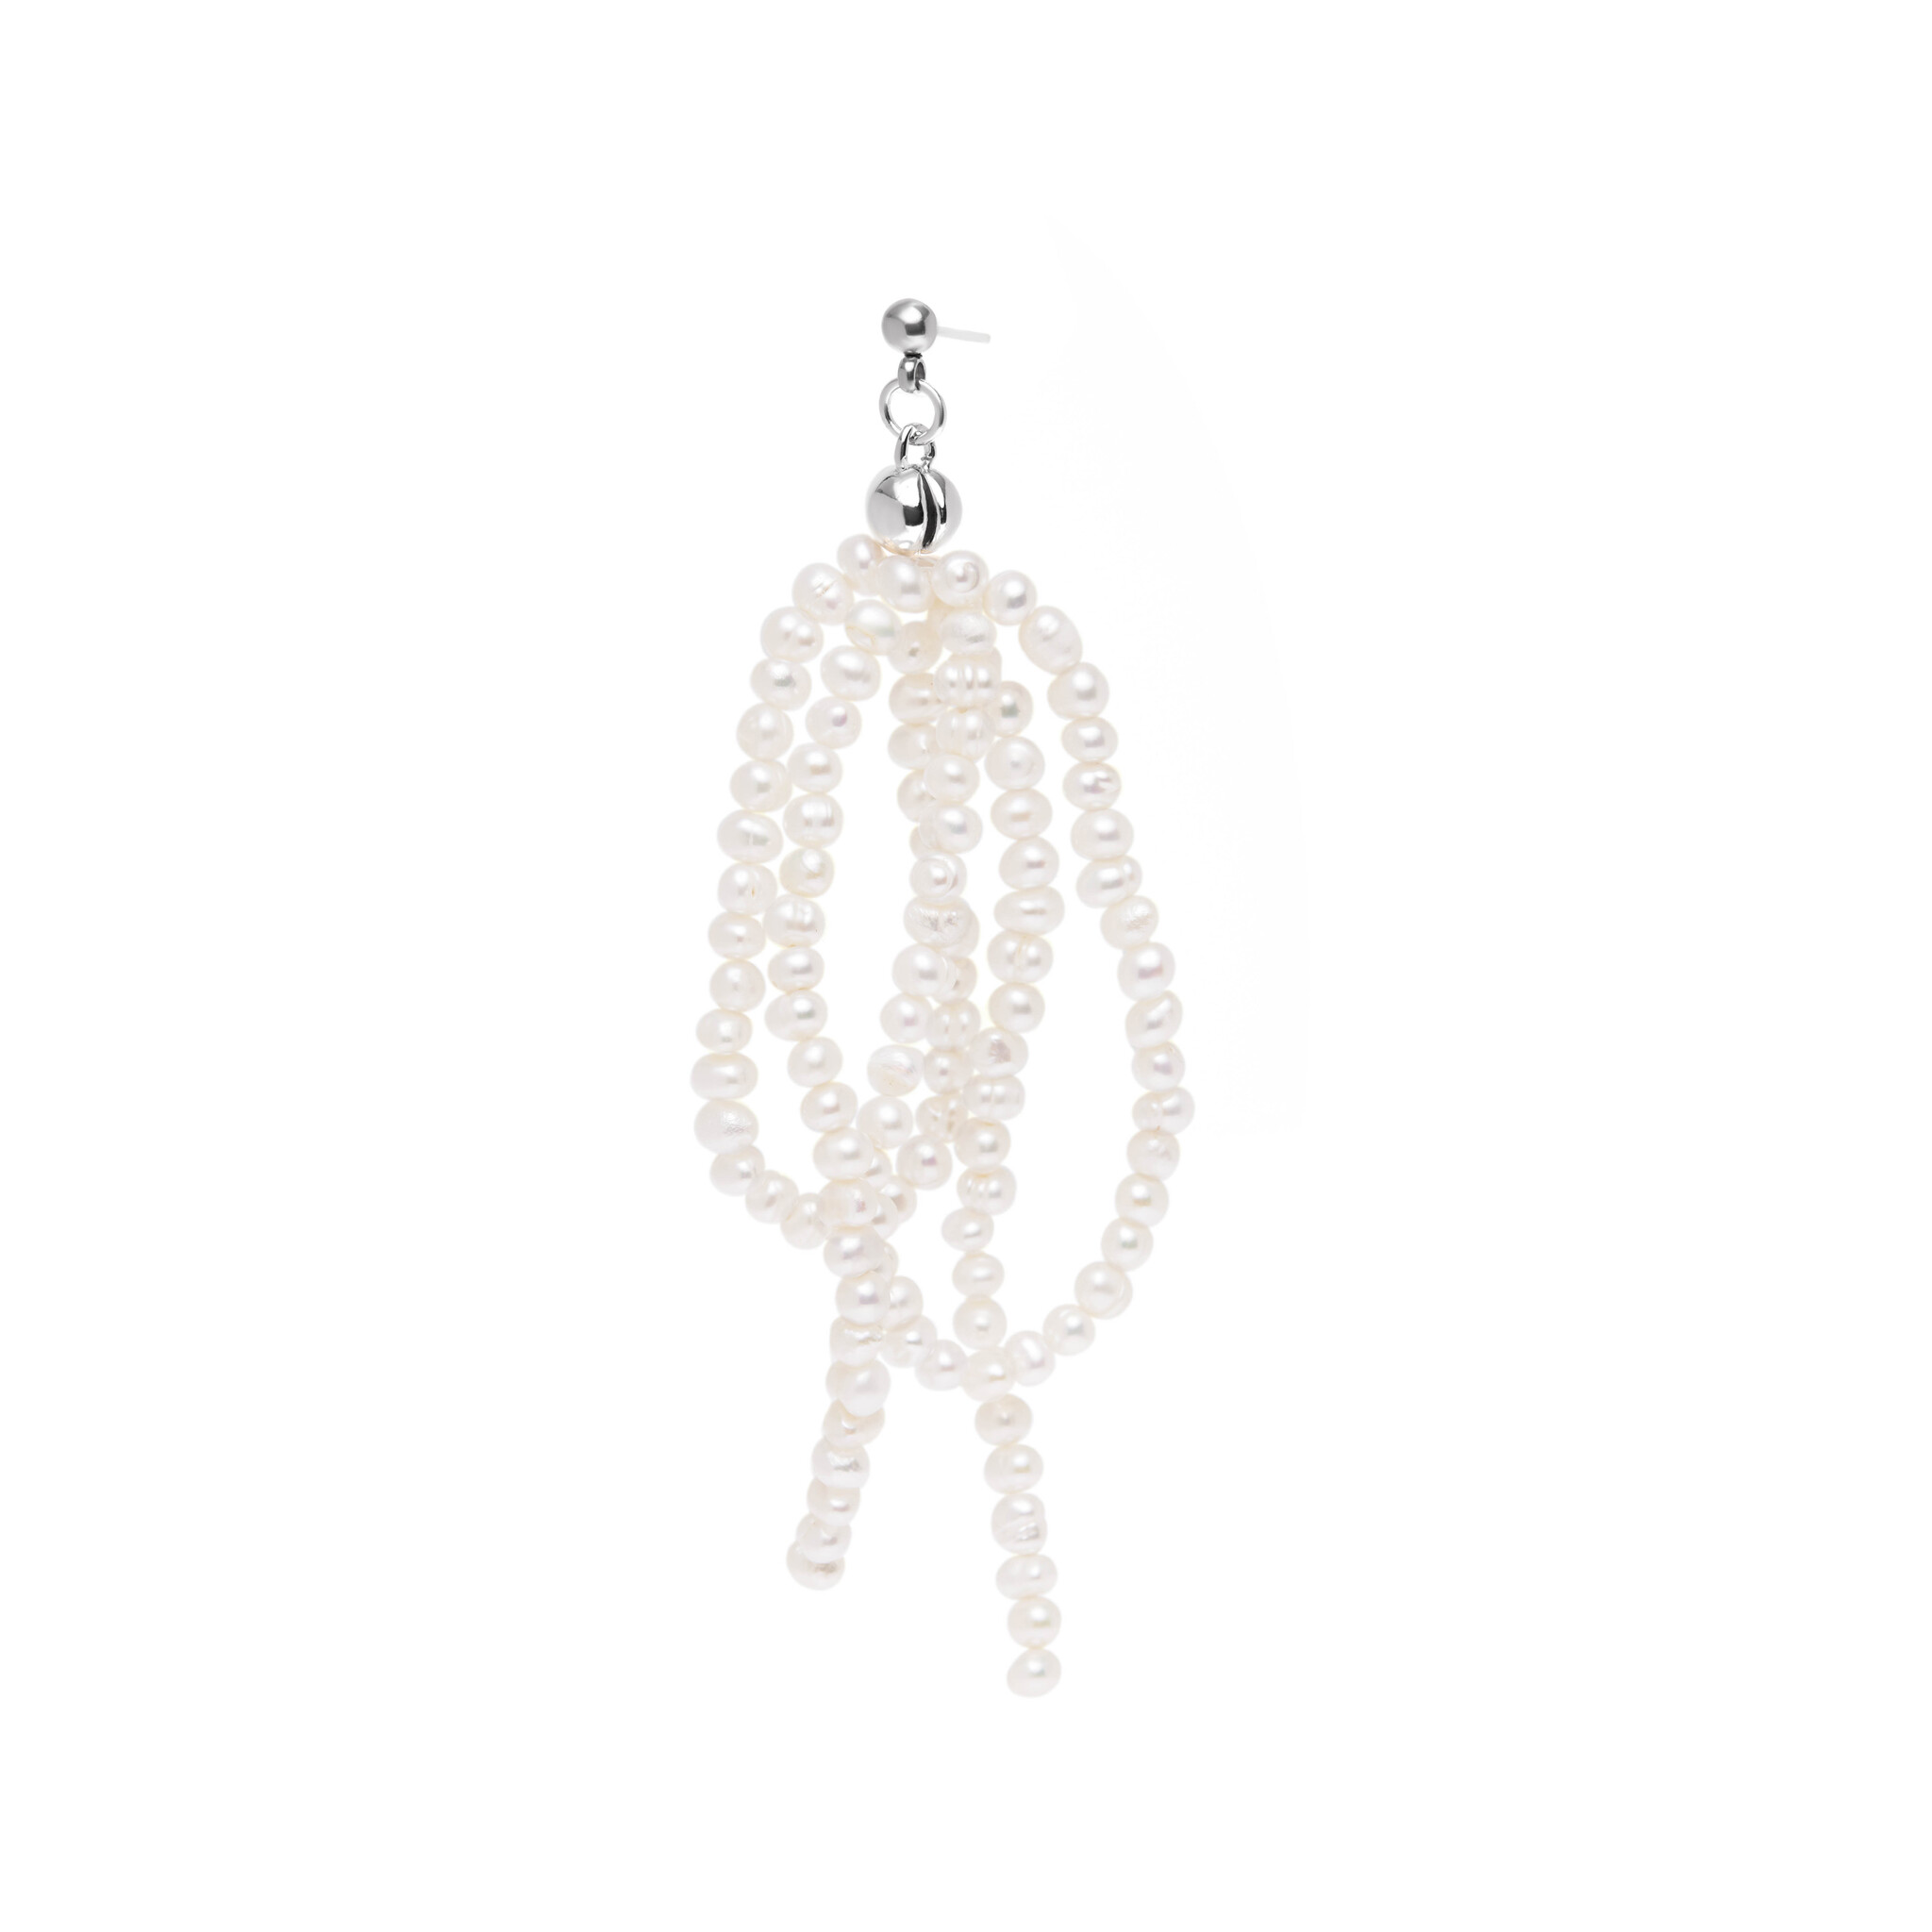 HOLLY JUNE Серьга Pearly Mess Earring holly june серьга pearly mess earring